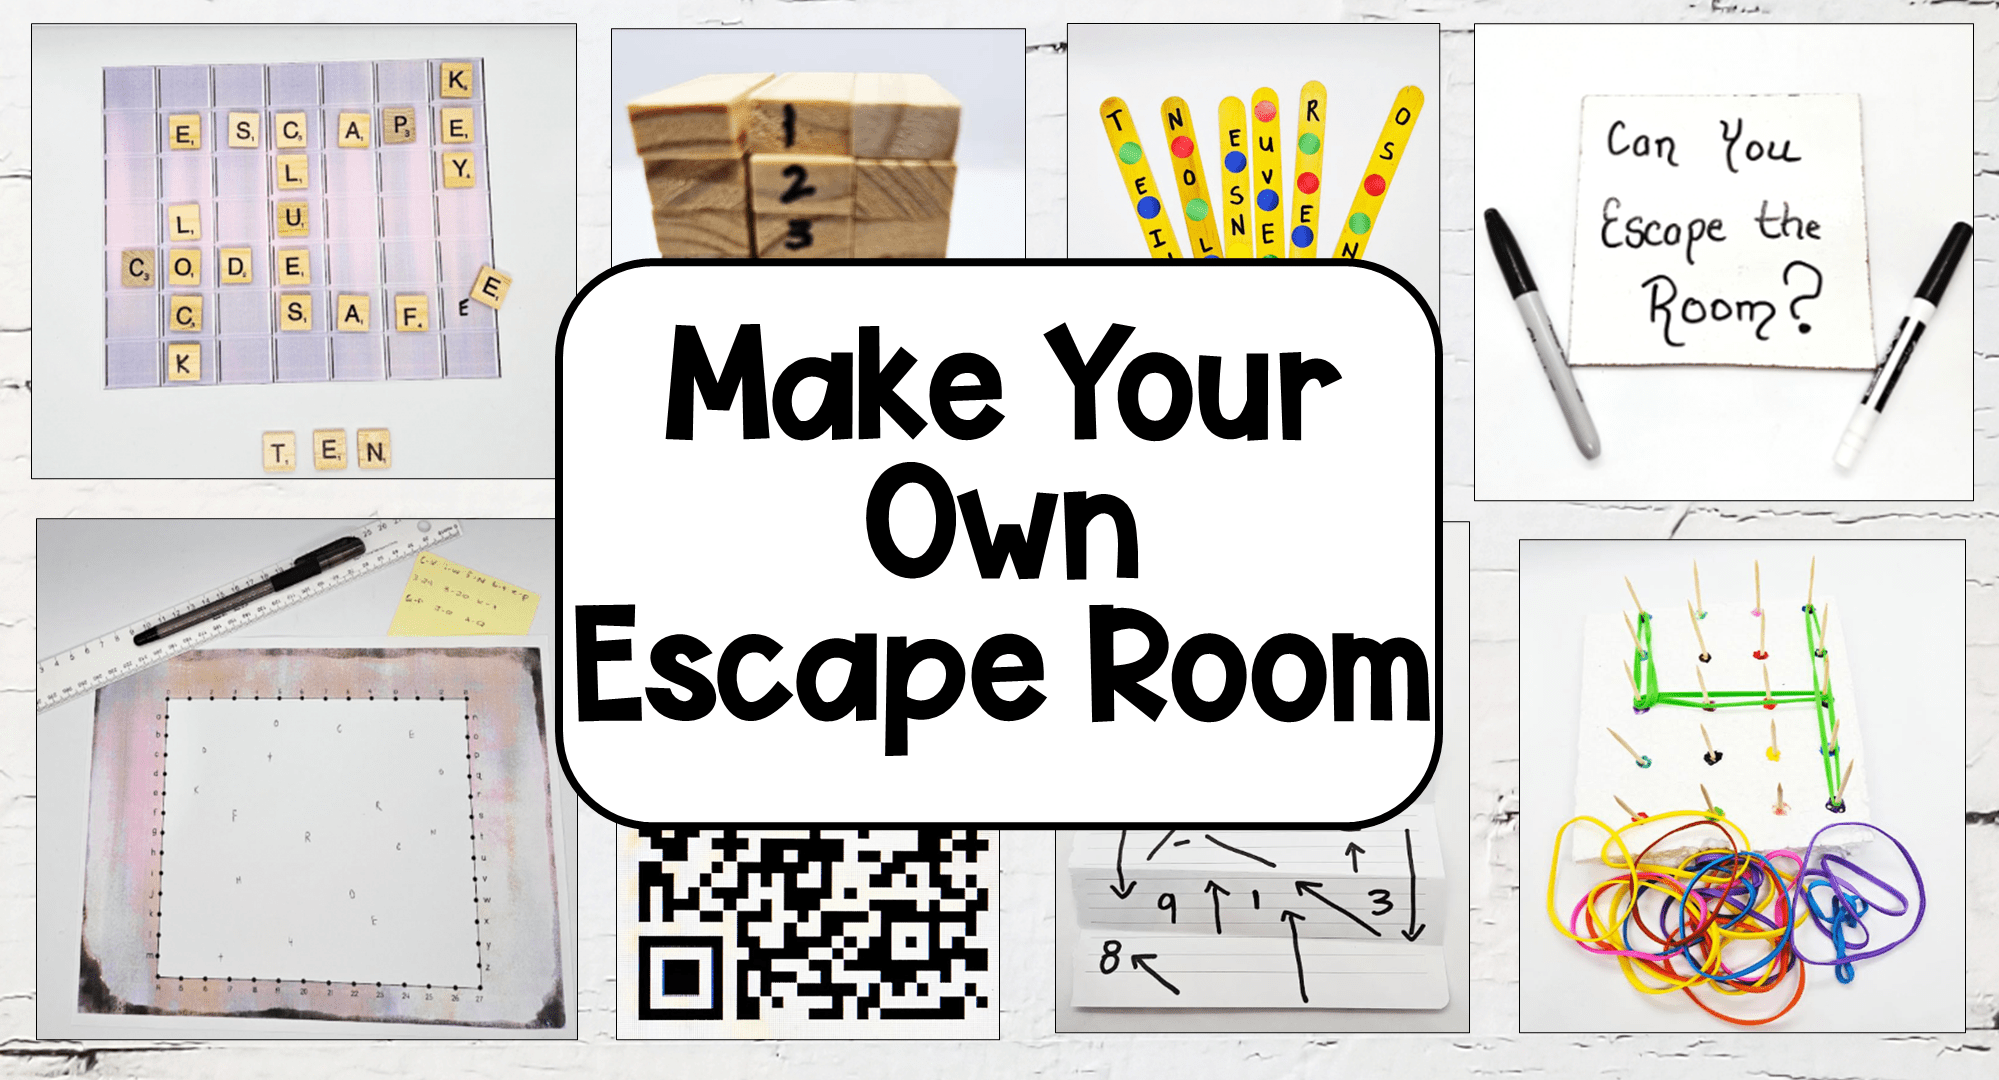 Classroom Escape Room: How To Build One and Use It